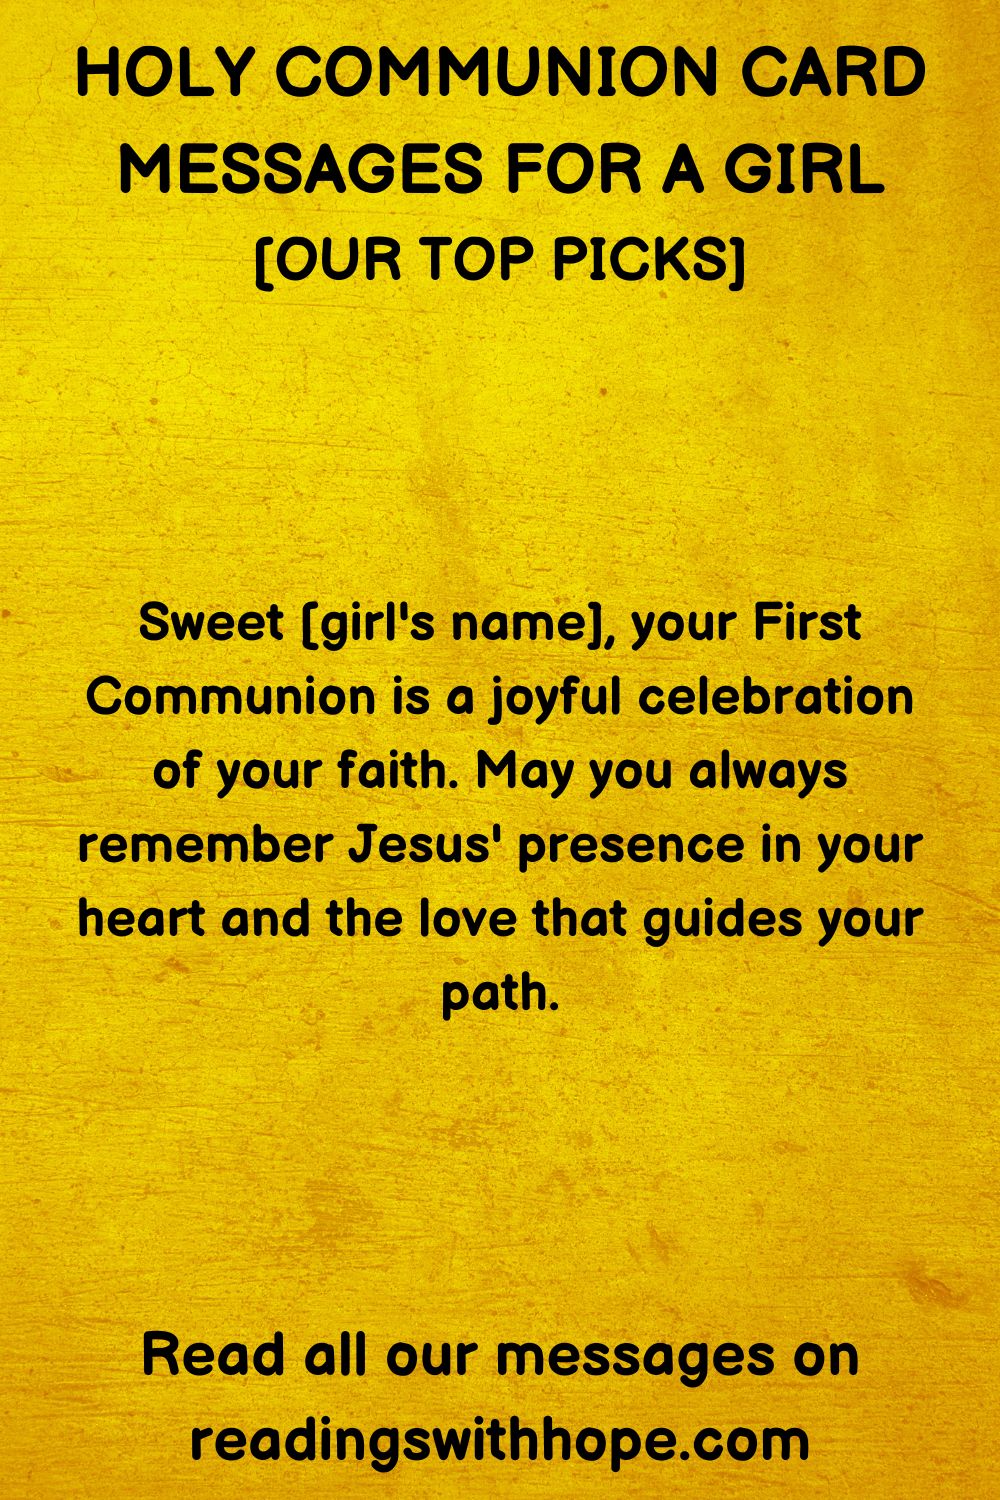 Holy Communion Card Messages for a Girl